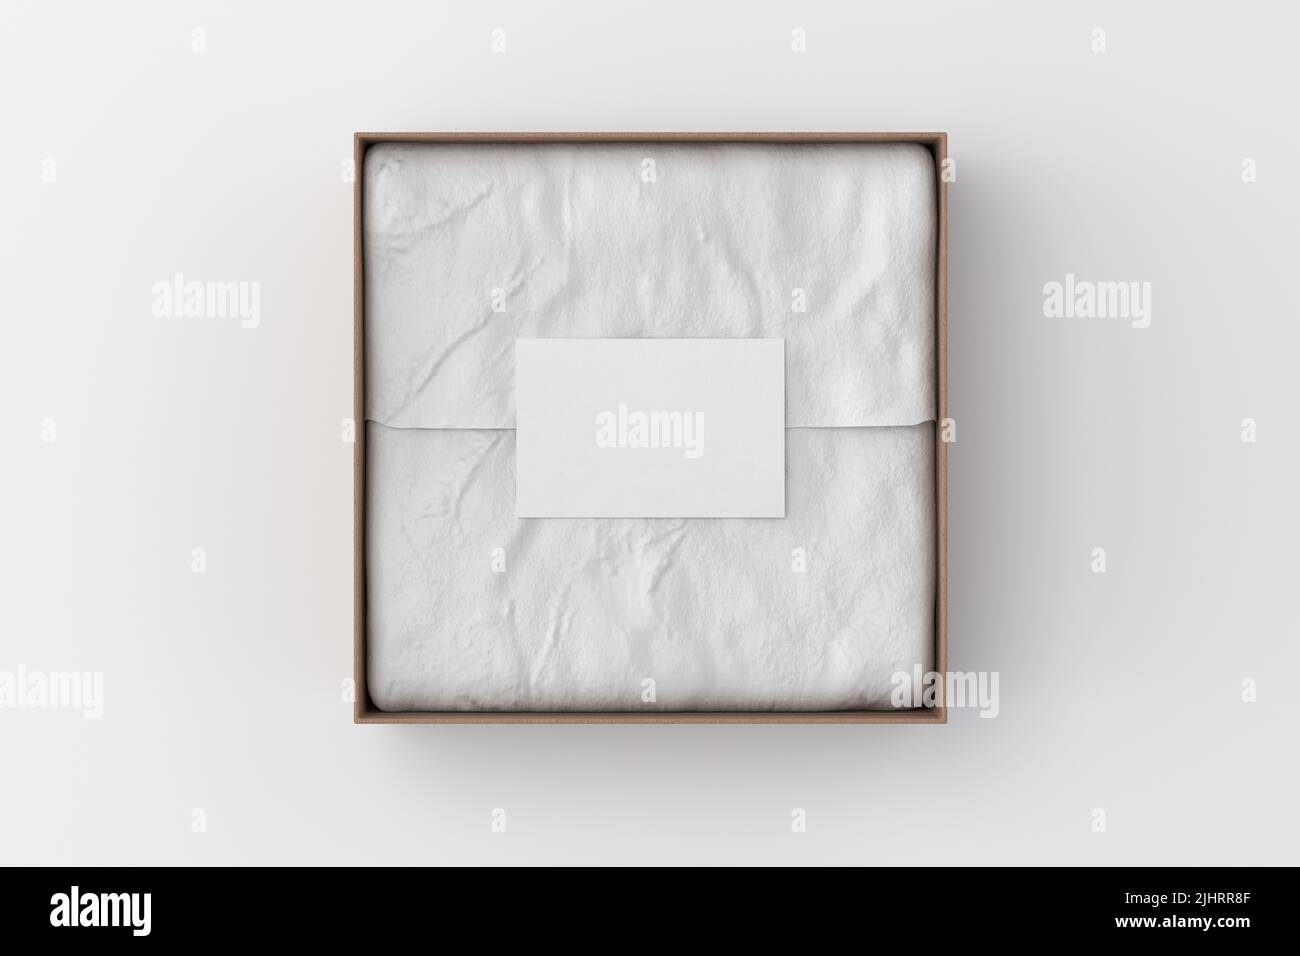 Square gift box mock up. Cardboard gift box with blank label or business card on wrapping paper. White background. View directly above. 3d illustratio Stock Photo